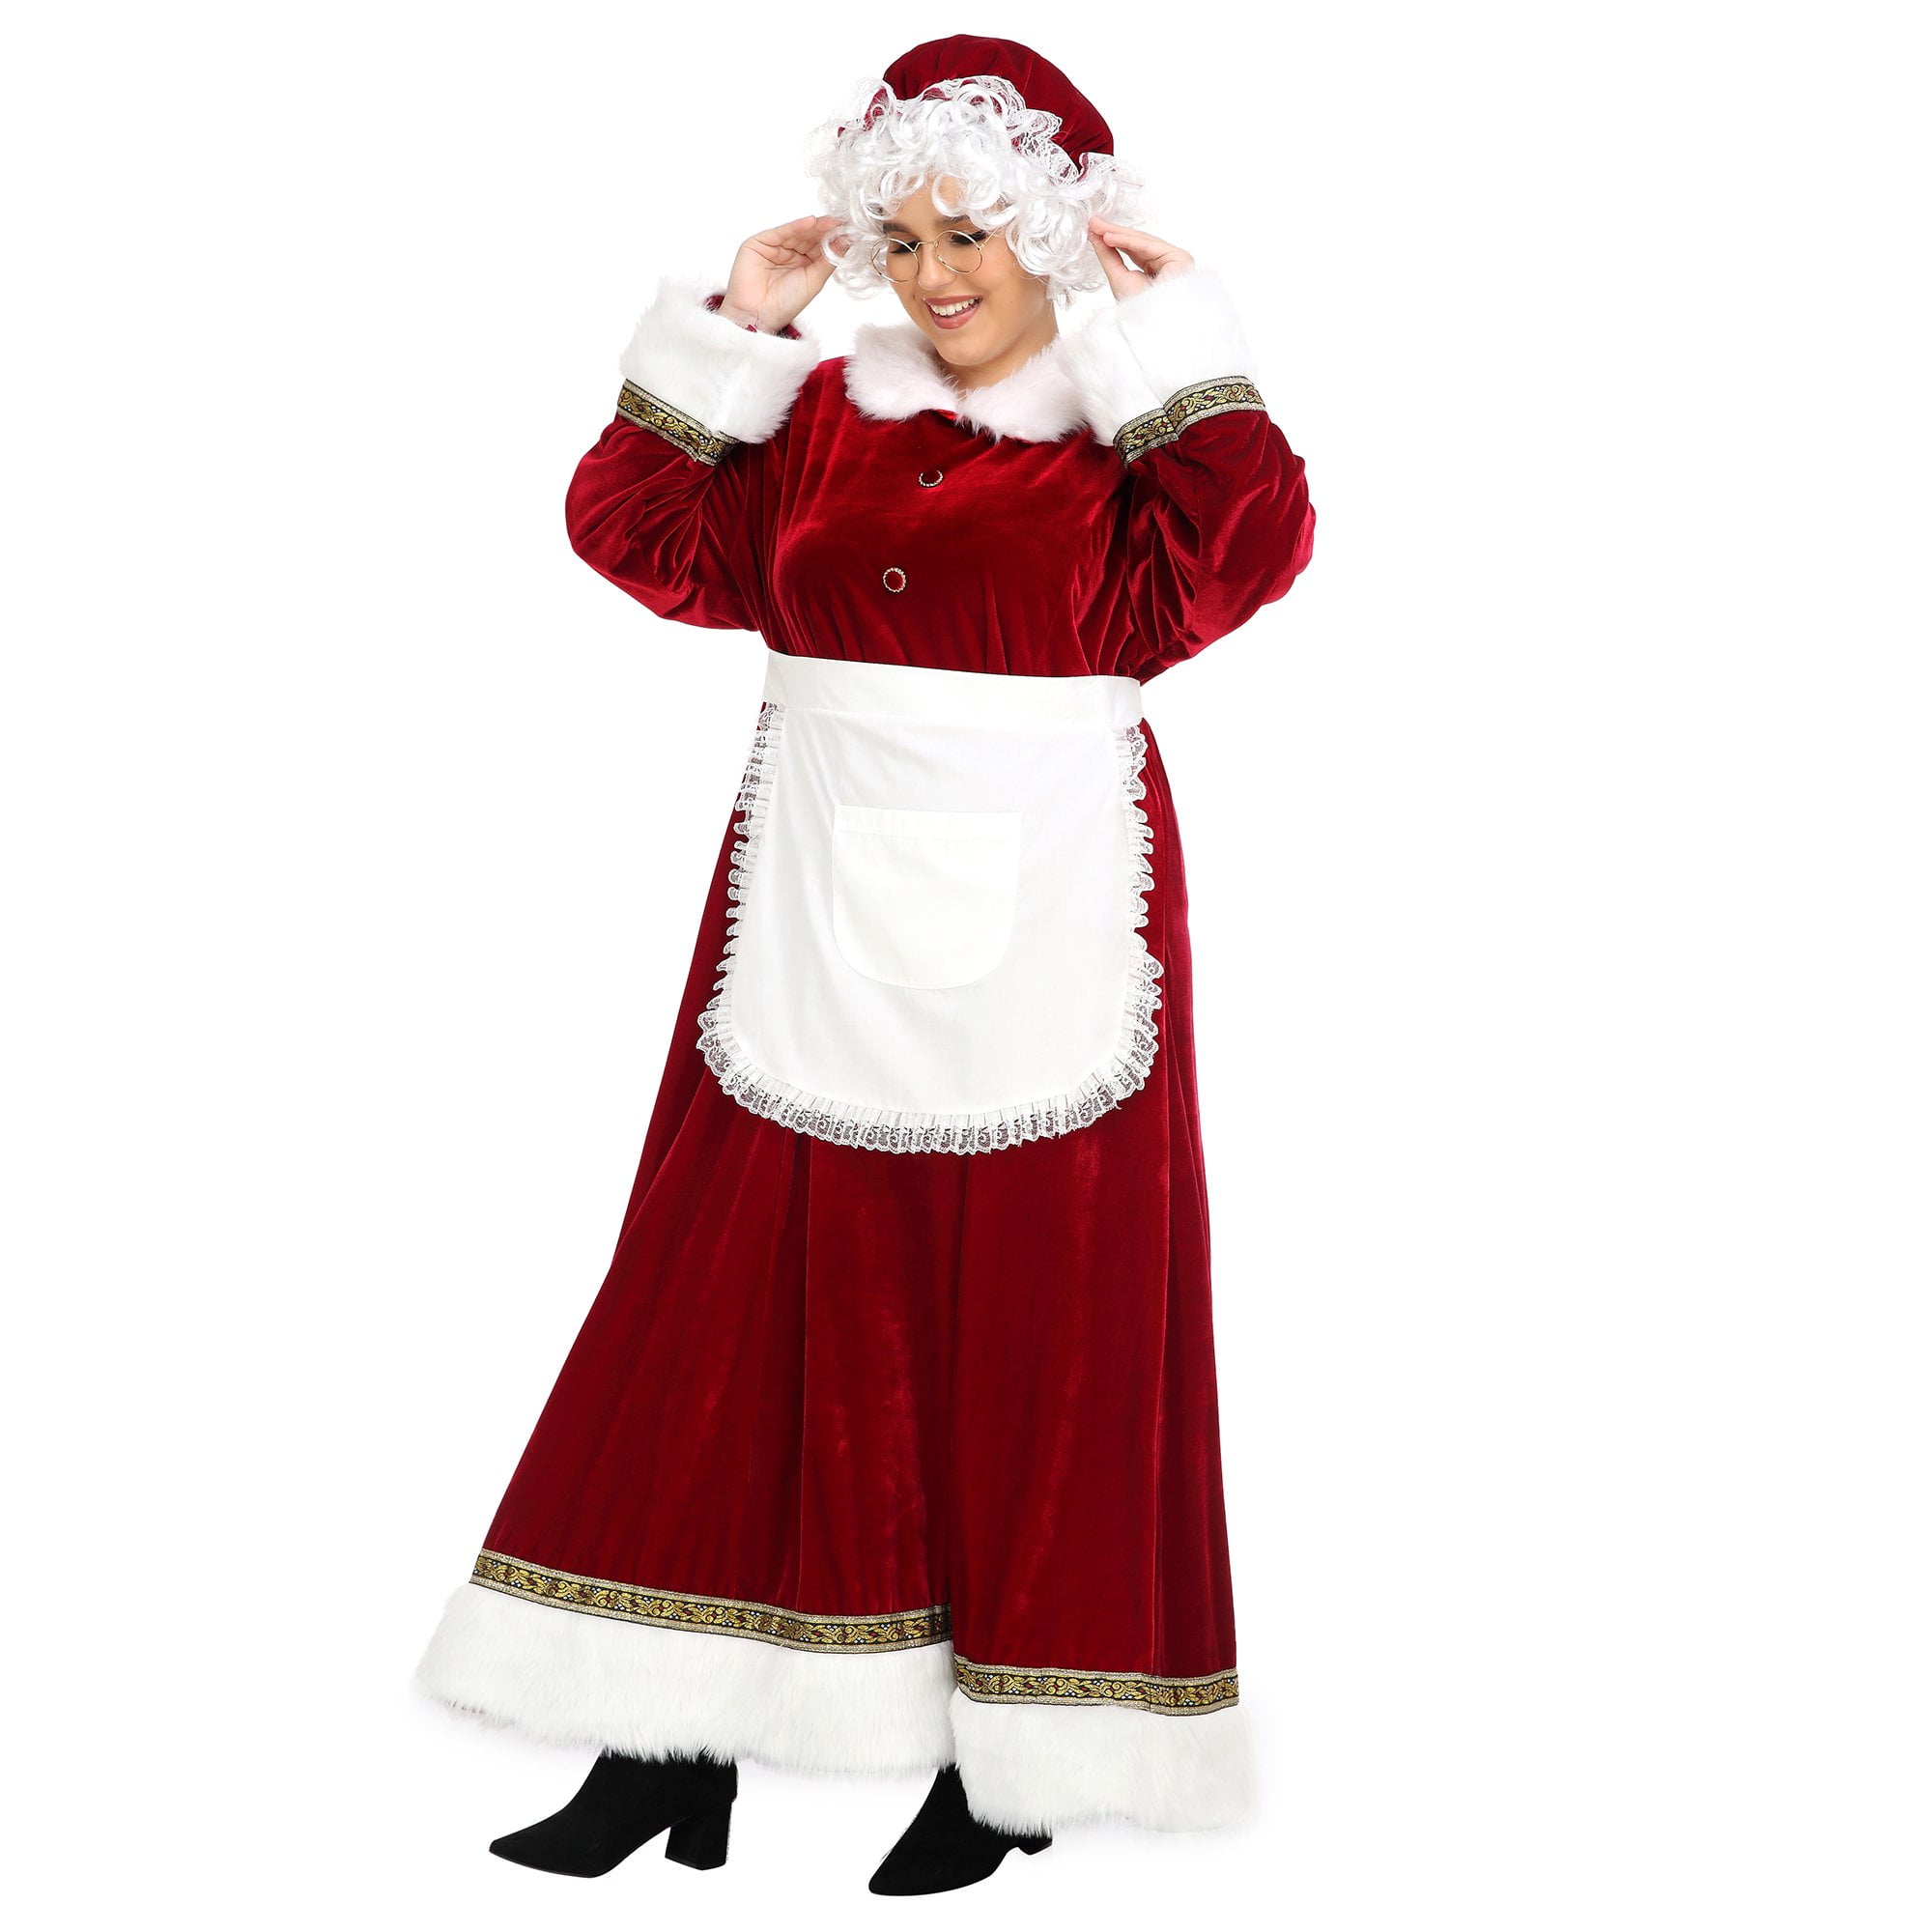 Mrs. Claus Costume for Women Plus Size Outfit Chirstmas Adult Santa Dress with Apron Wig and Glasses for Cosplay Party -M - Walmart.com